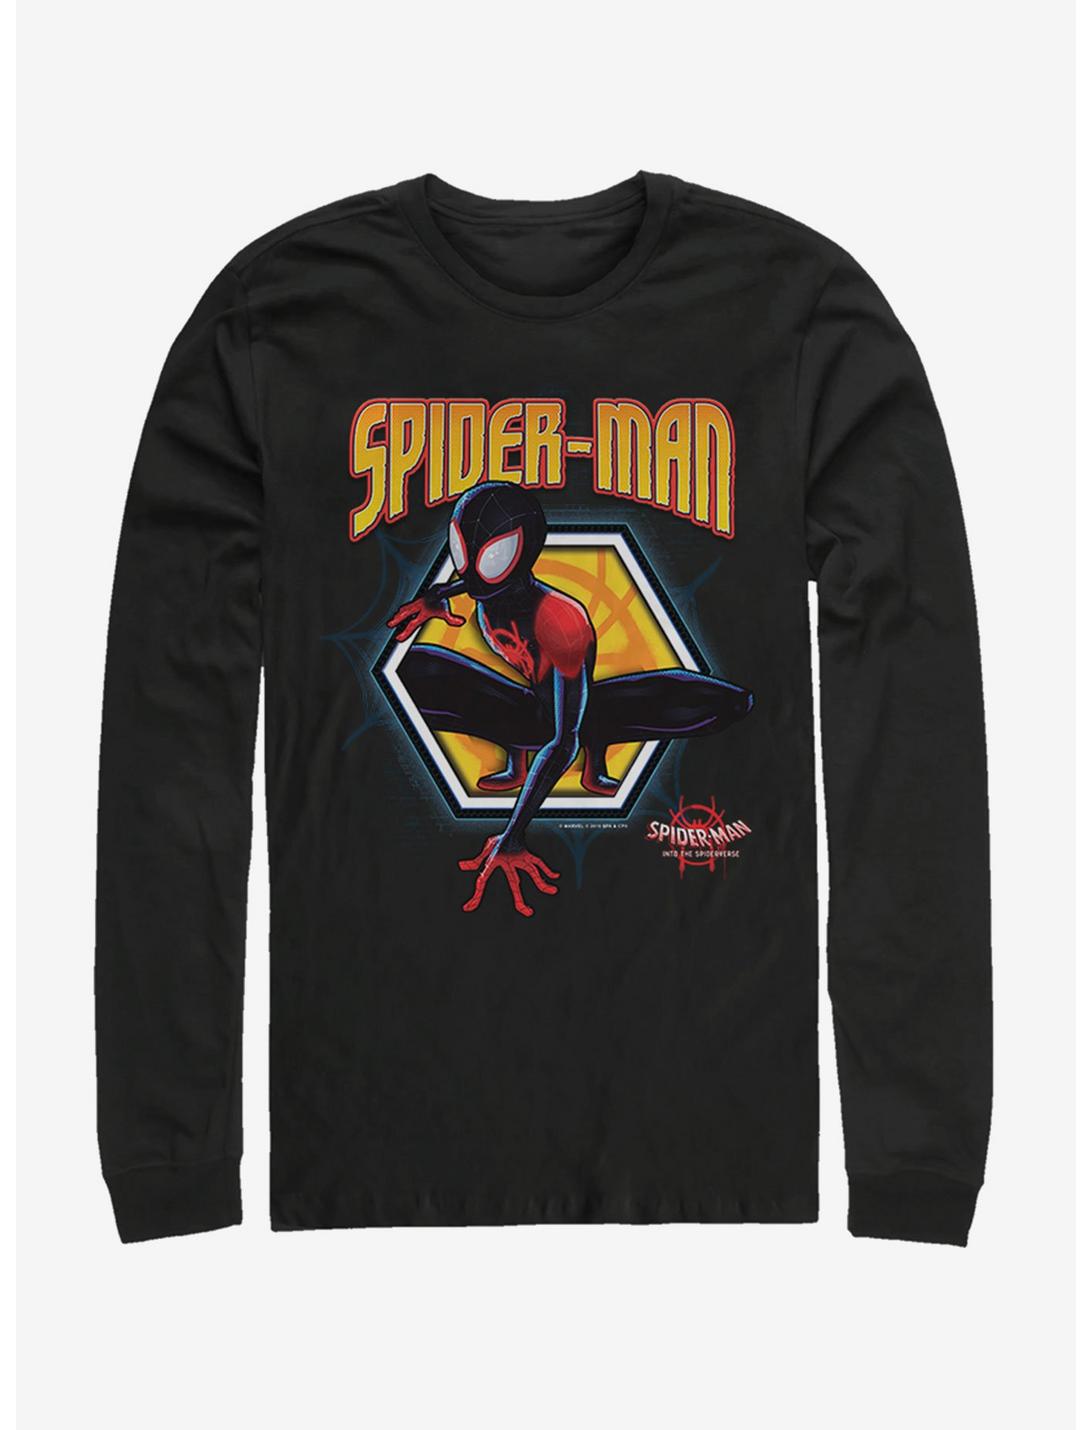 Plus Size Marvel Spider-Man: Into the Spider-Verse Golden Miles Womens Long-Sleeve T-Shirt, BLACK, hi-res